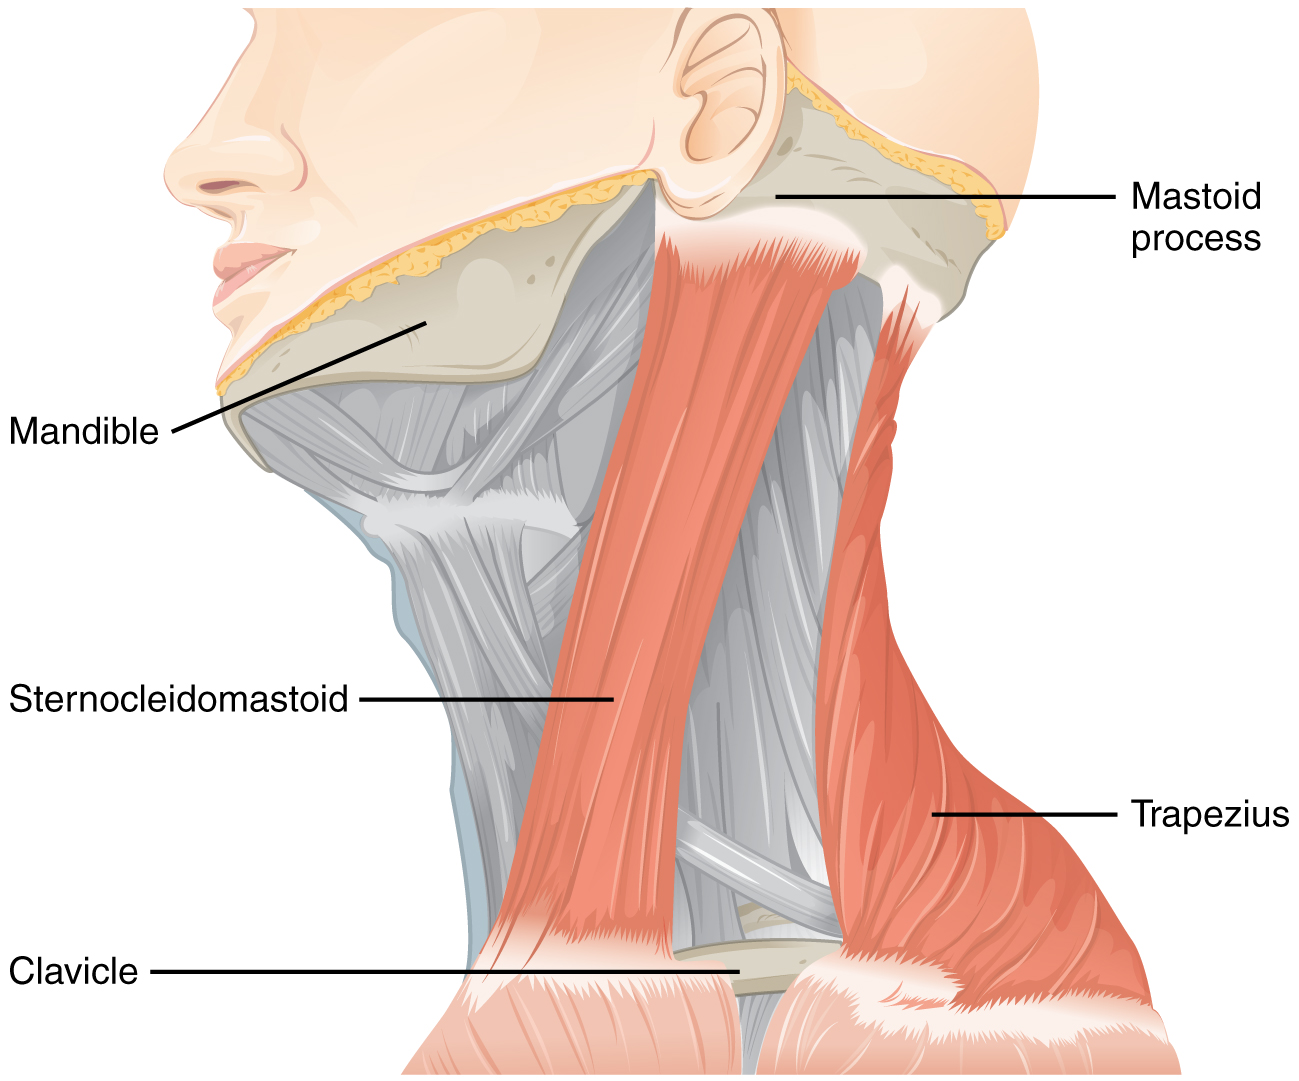 This figure shows the side view of a person’s neck with the different muscles labeled.